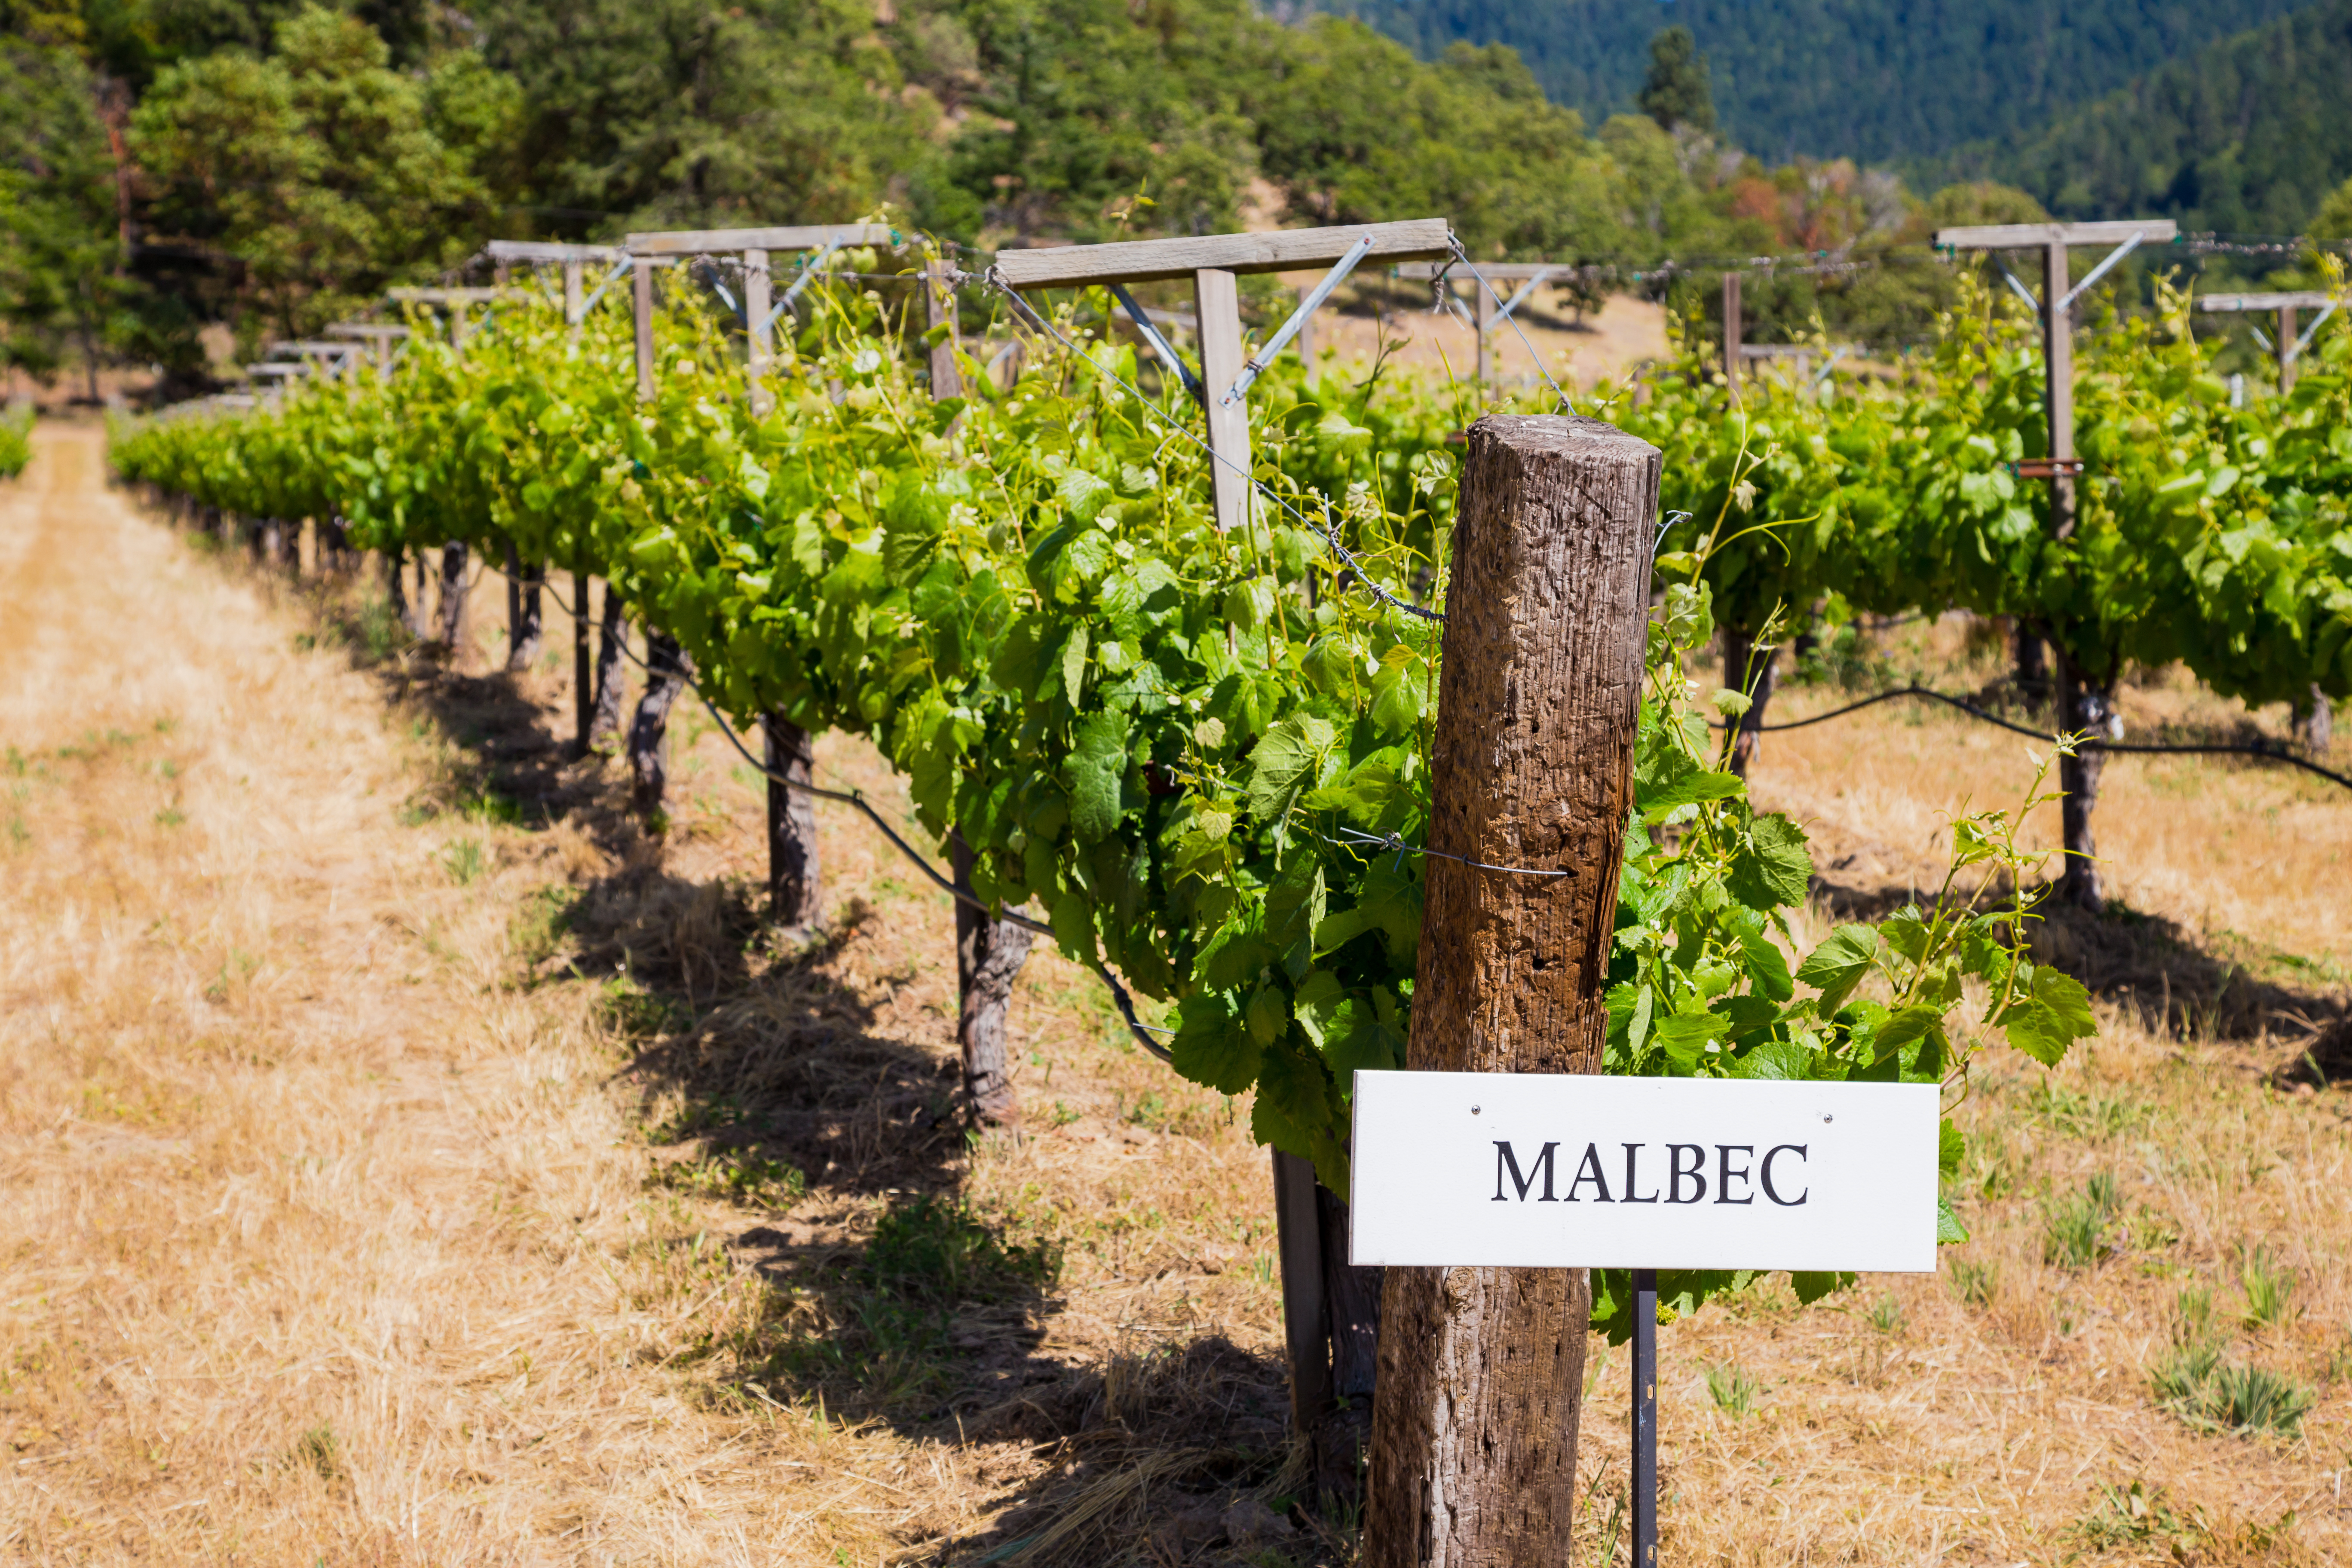 Malbec wine vines in a row with a sign reading "Malbec"